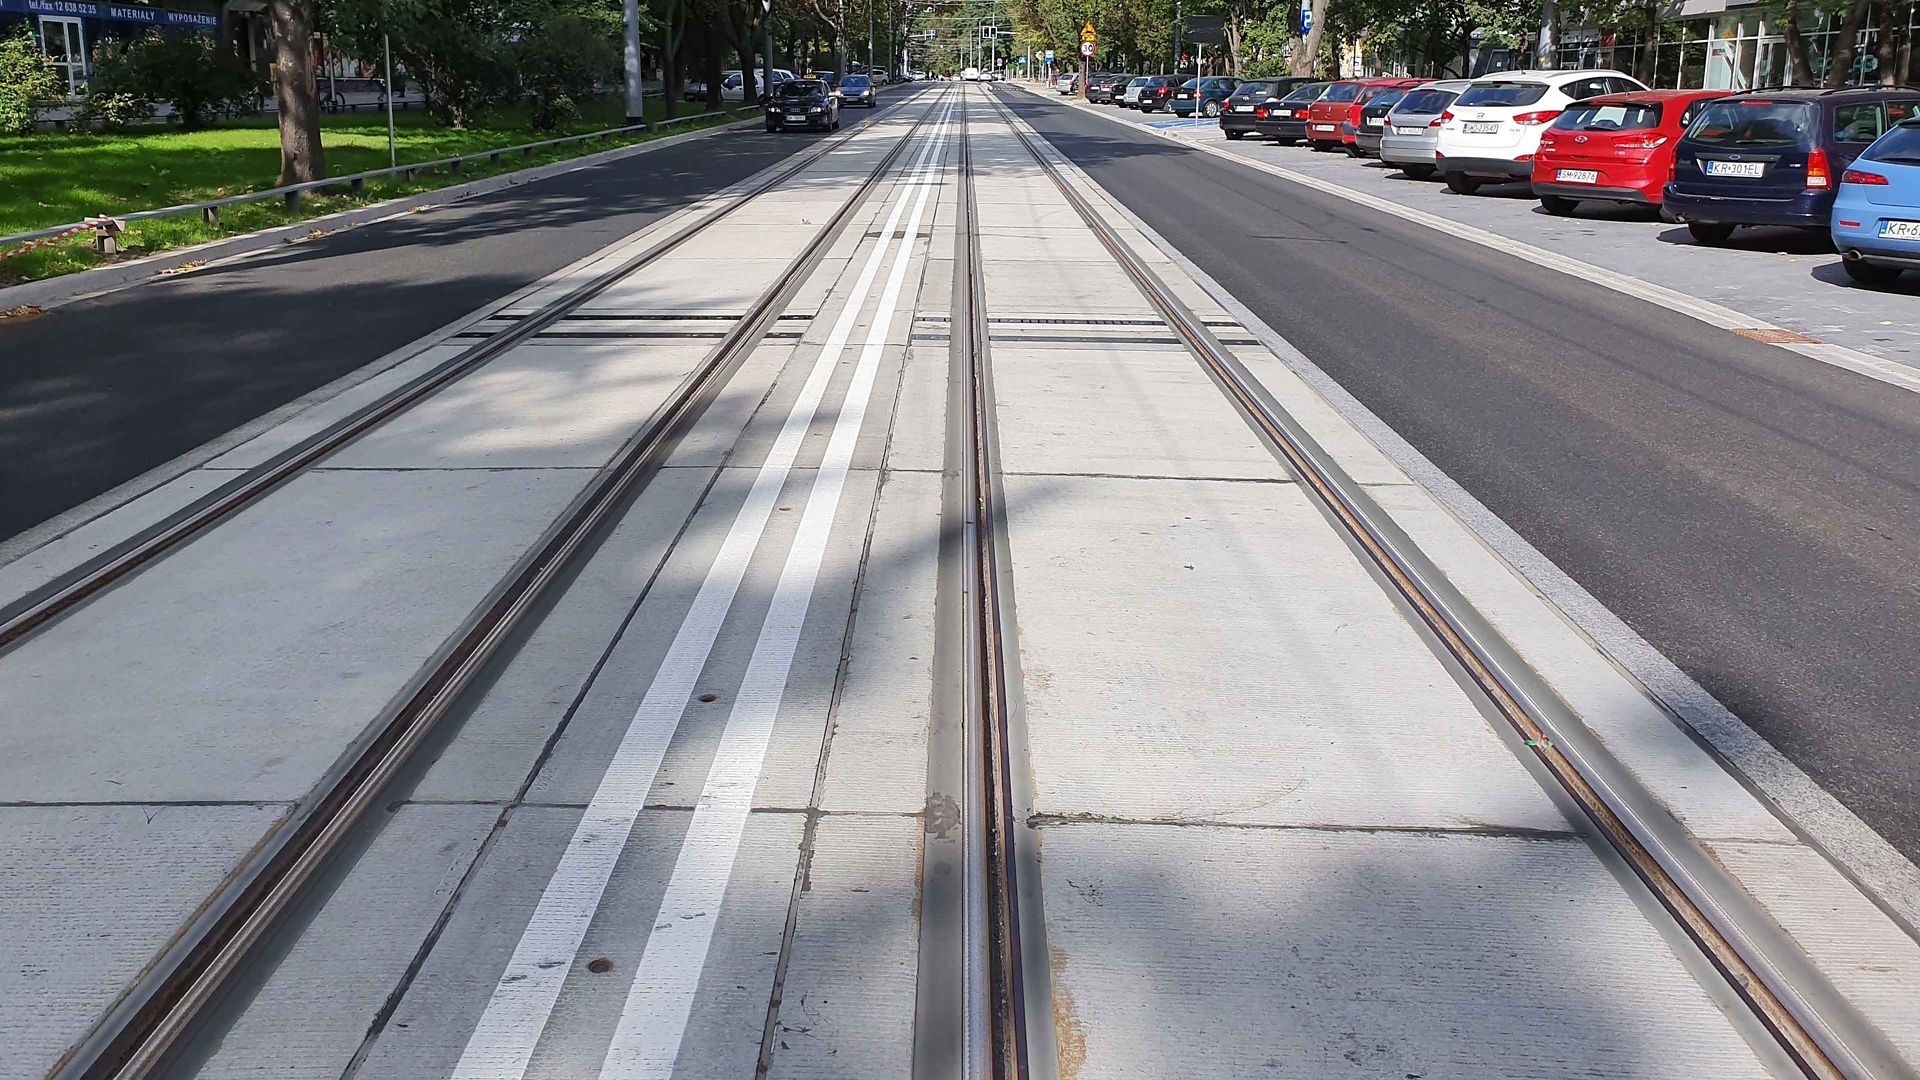 Tram rail track in street with parked cars and cars driving by and trees